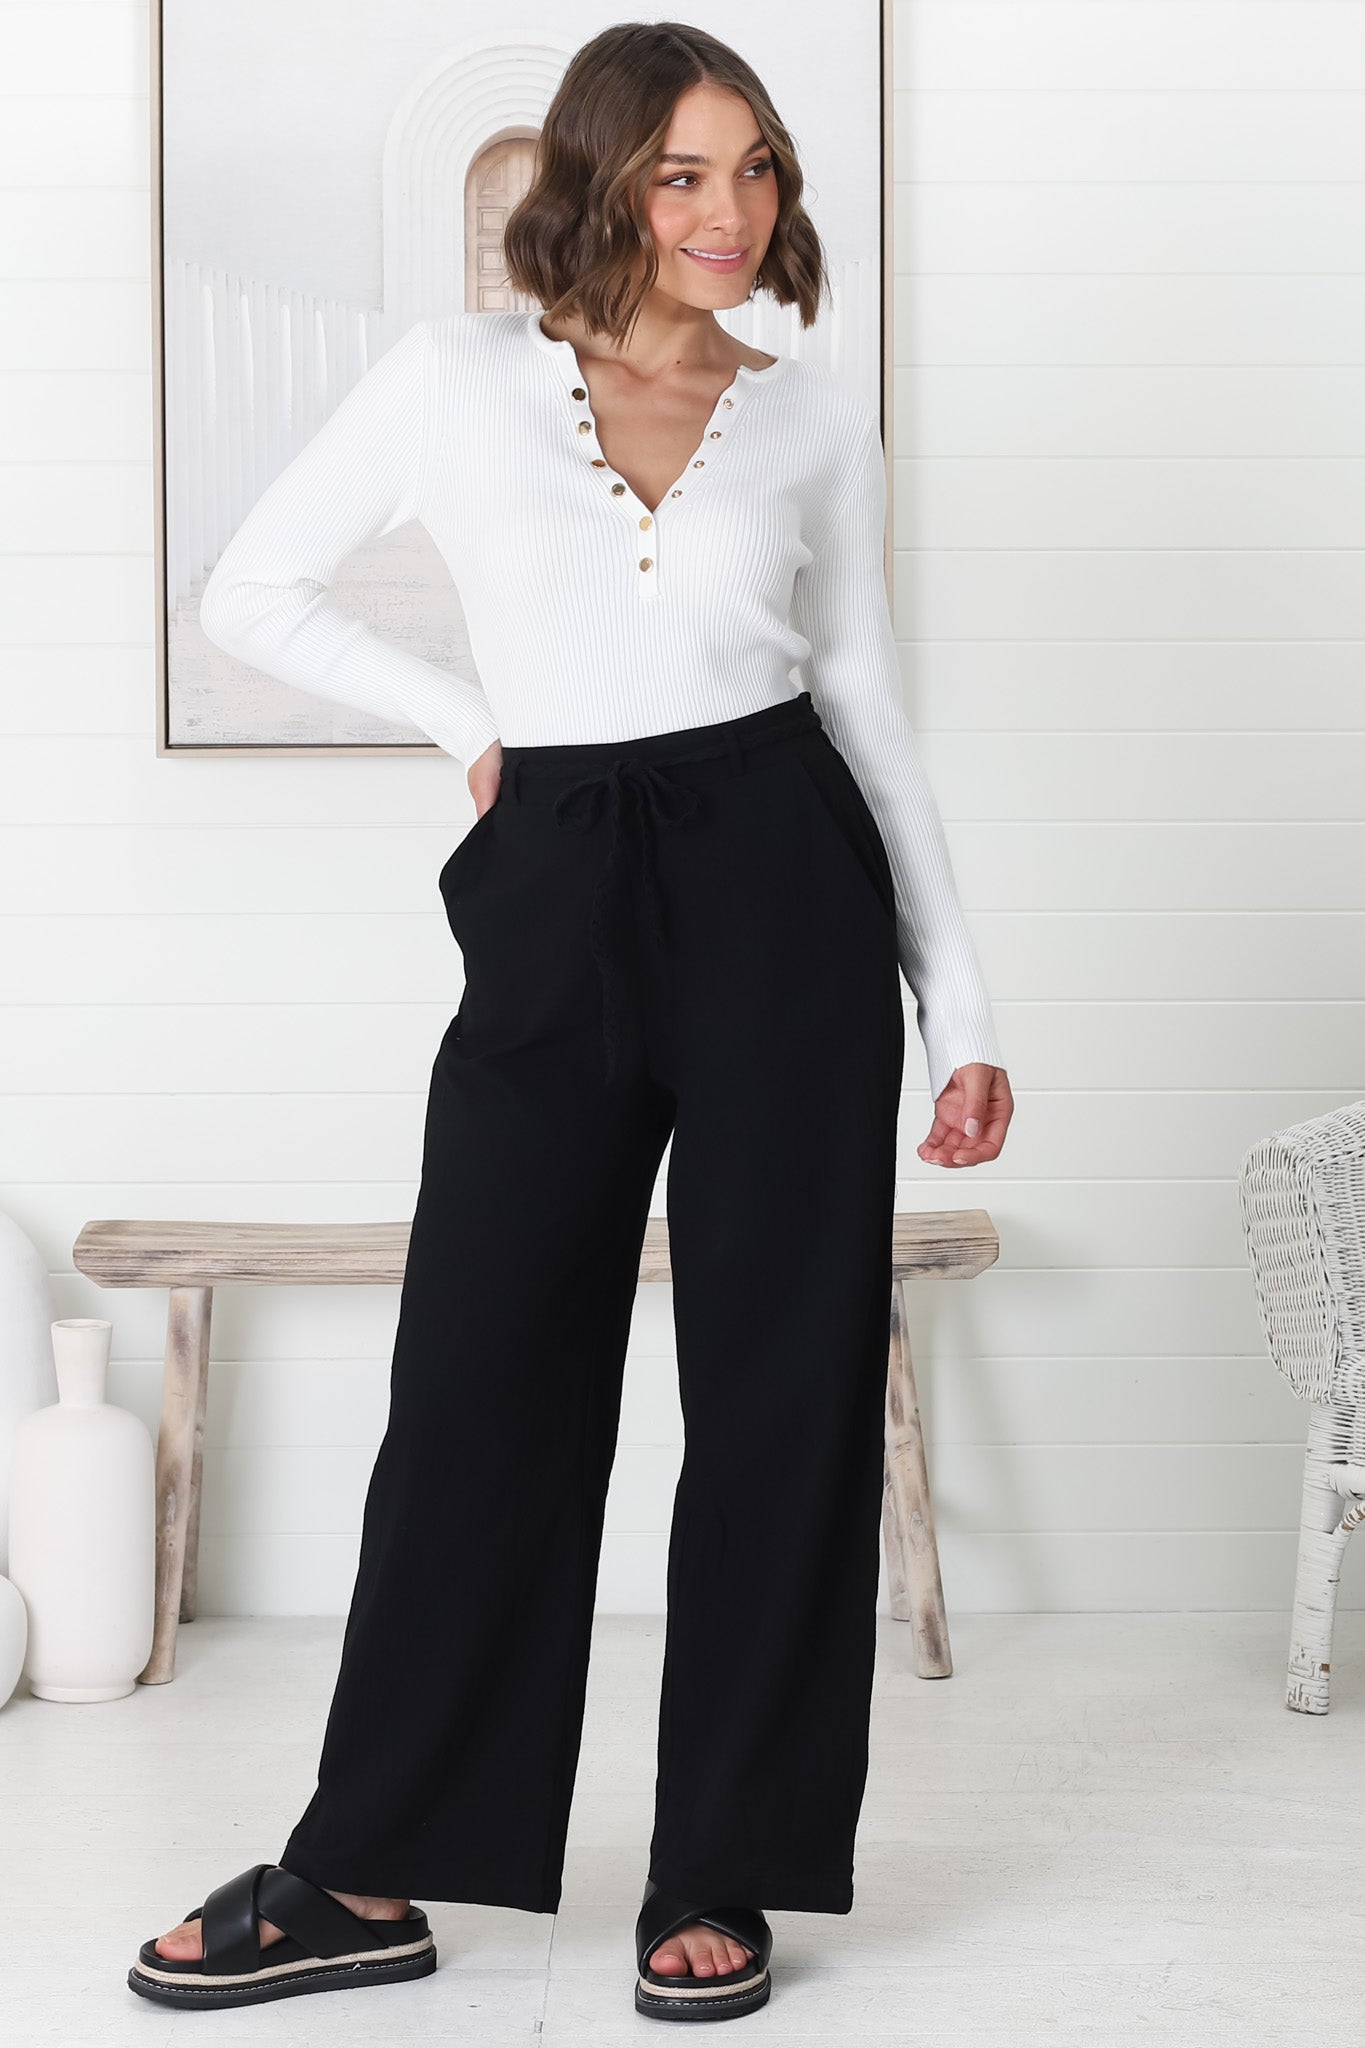 Roswell Pants - Cotton Wide Leg Pant with Plaited Belt in Black